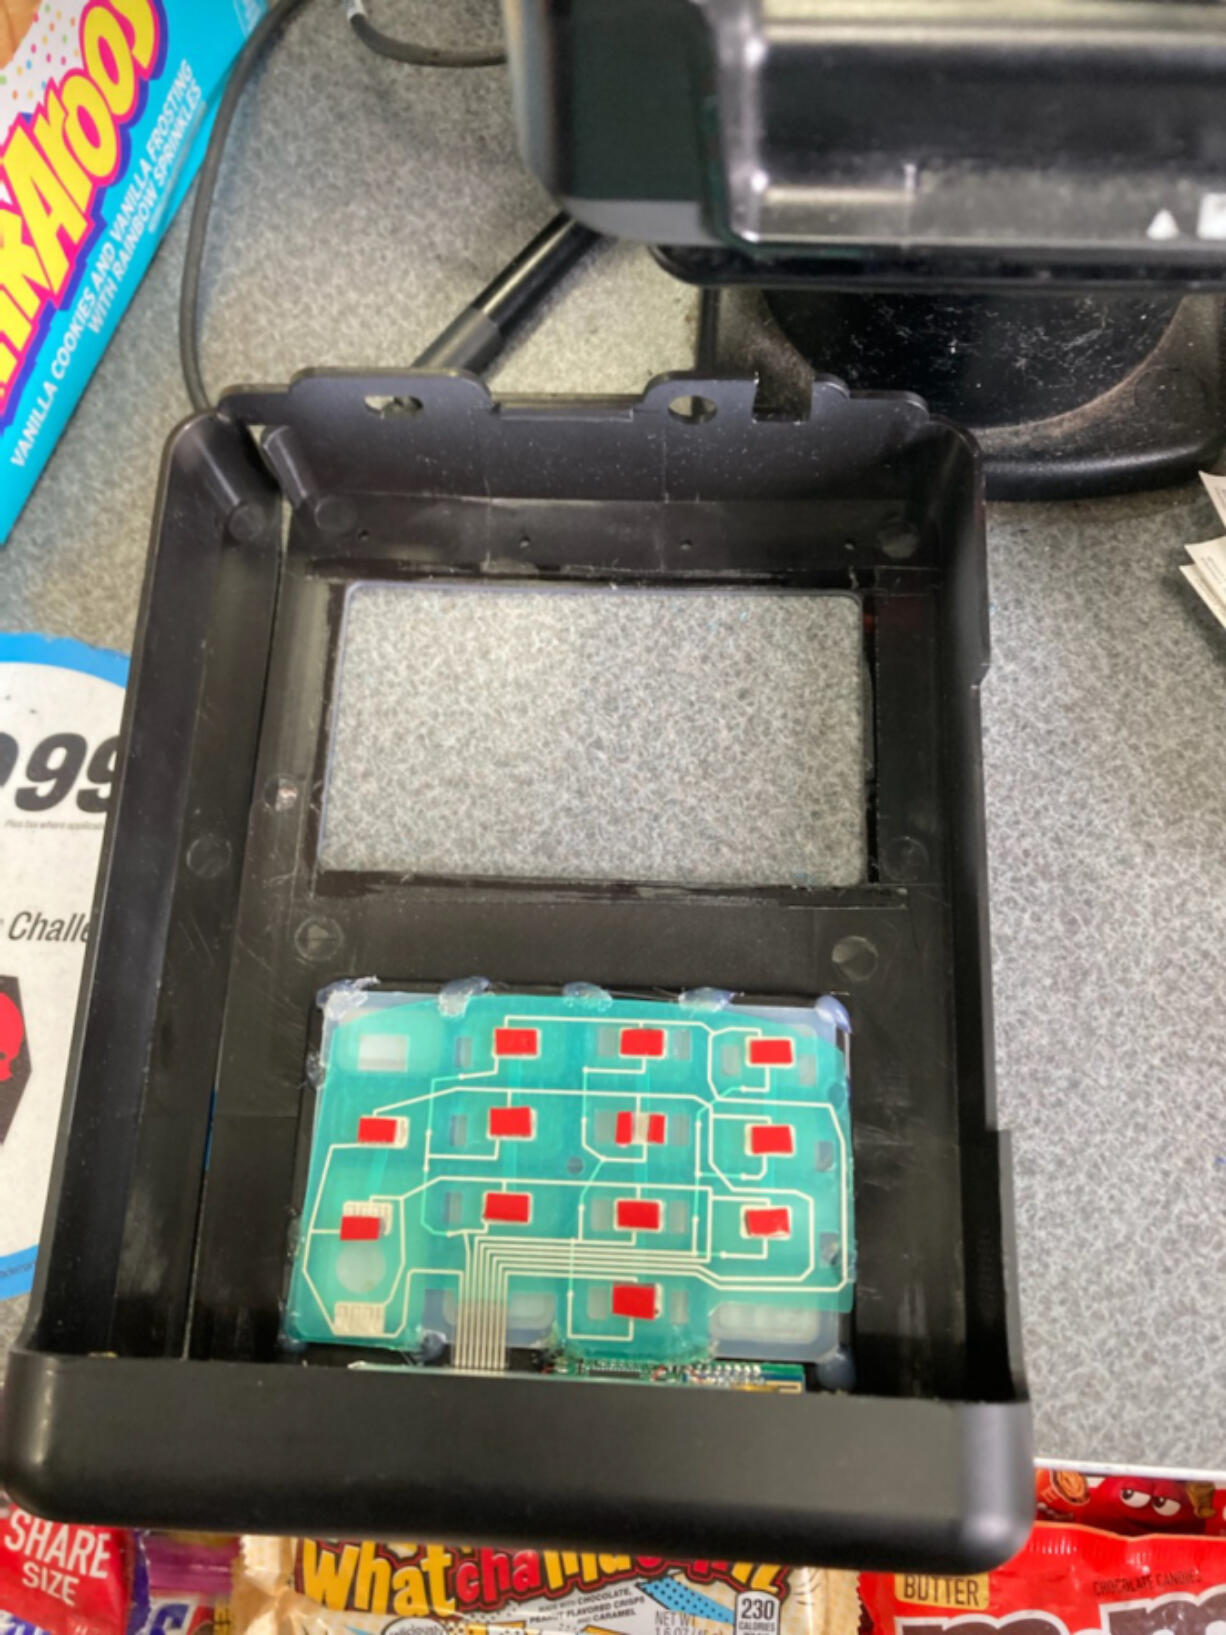 Clark County sheriff's deputies are investigating after employees at 7-Eleven stores in Hazel Dell and Orchards reported finding credit card skimmers -- a device installed on card readers that collects card information -- on their card readers Friday.